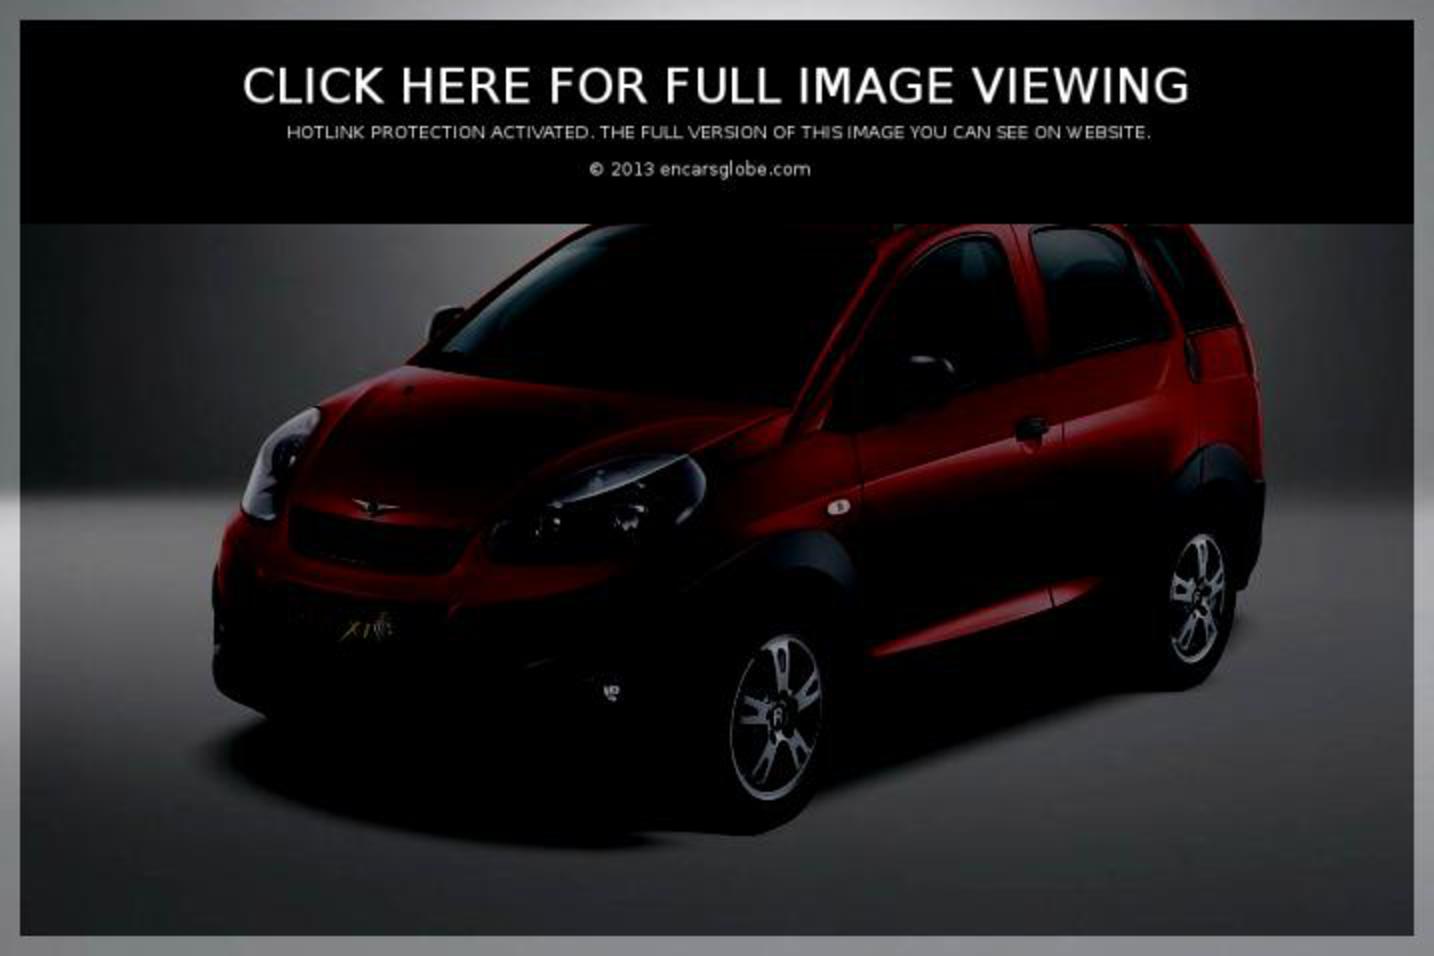 Chery X1 EV: Photo gallery, complete information about model ...